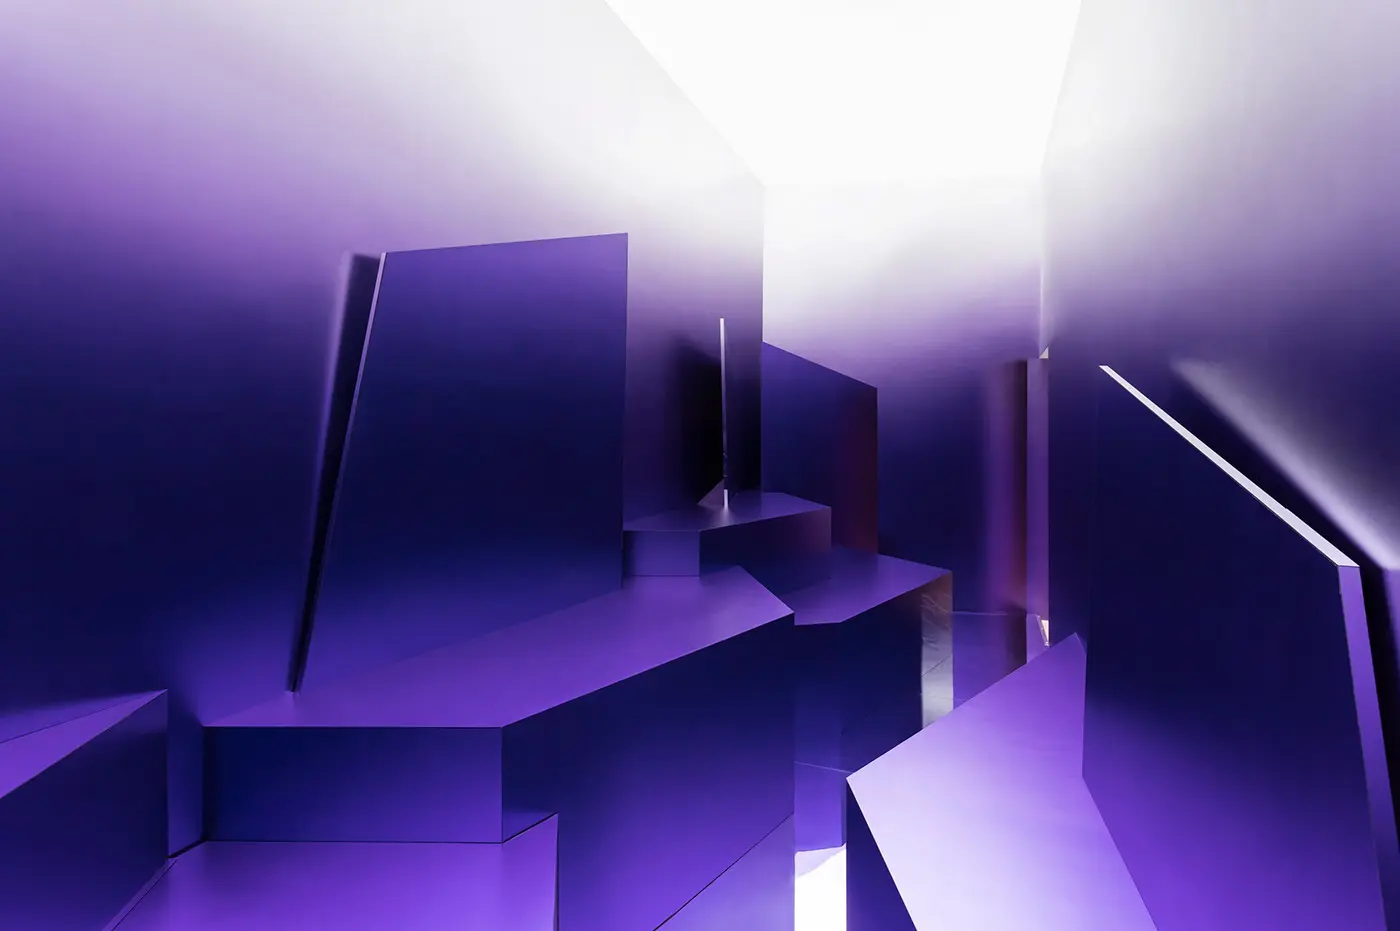 Get lost in the mystical purple-shaded world of Skychrome